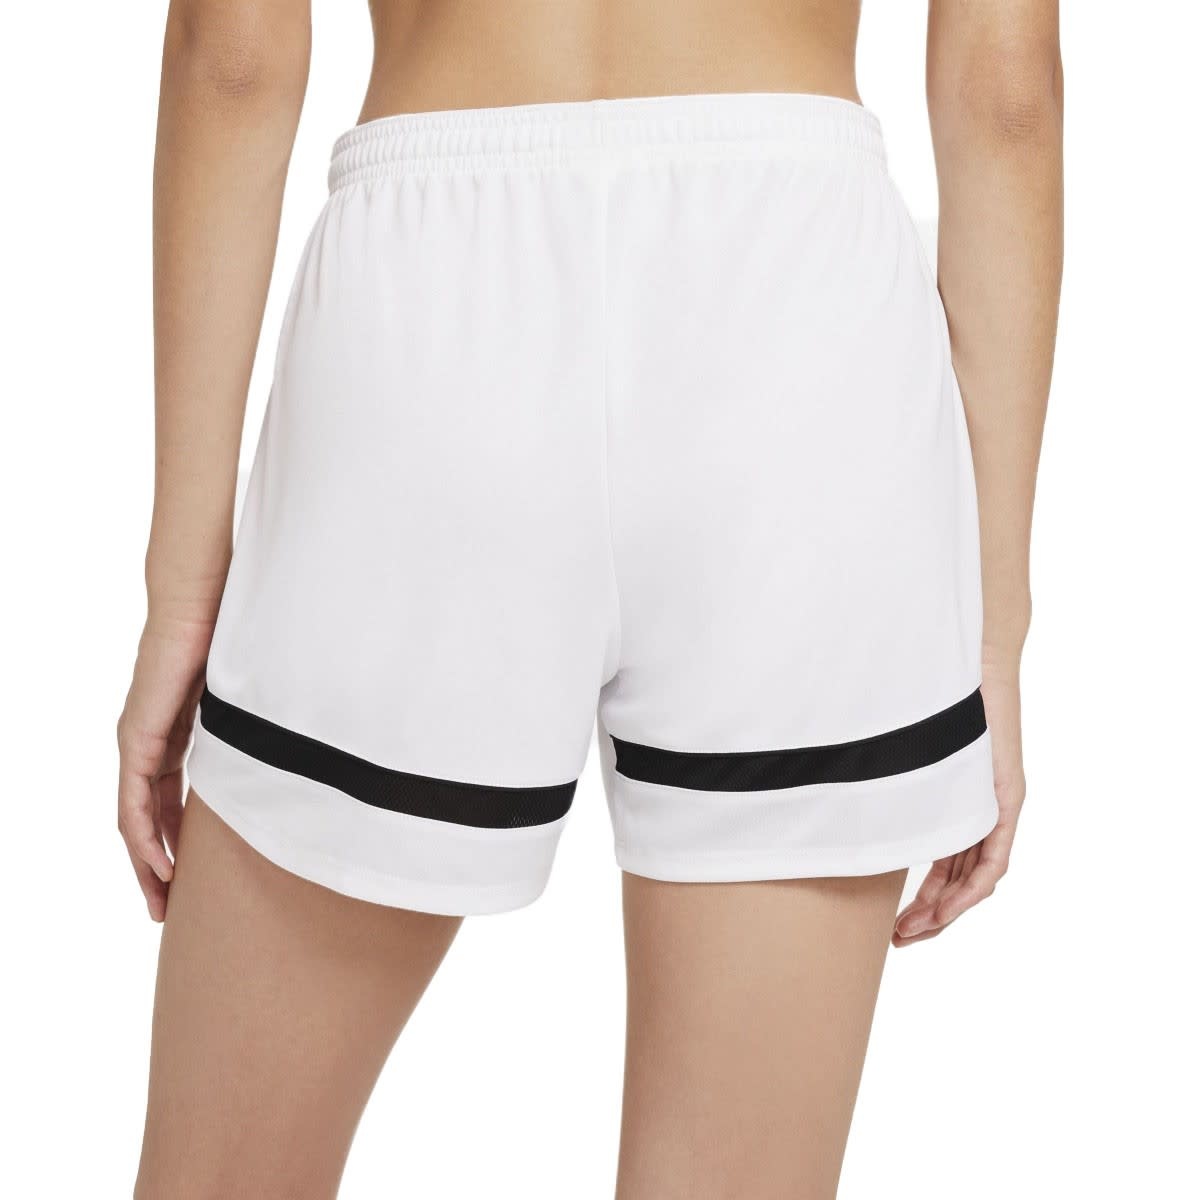 Nike Shorts Womens Small White Dri-Fit Brief Lined Outdoors Athletic Ladies